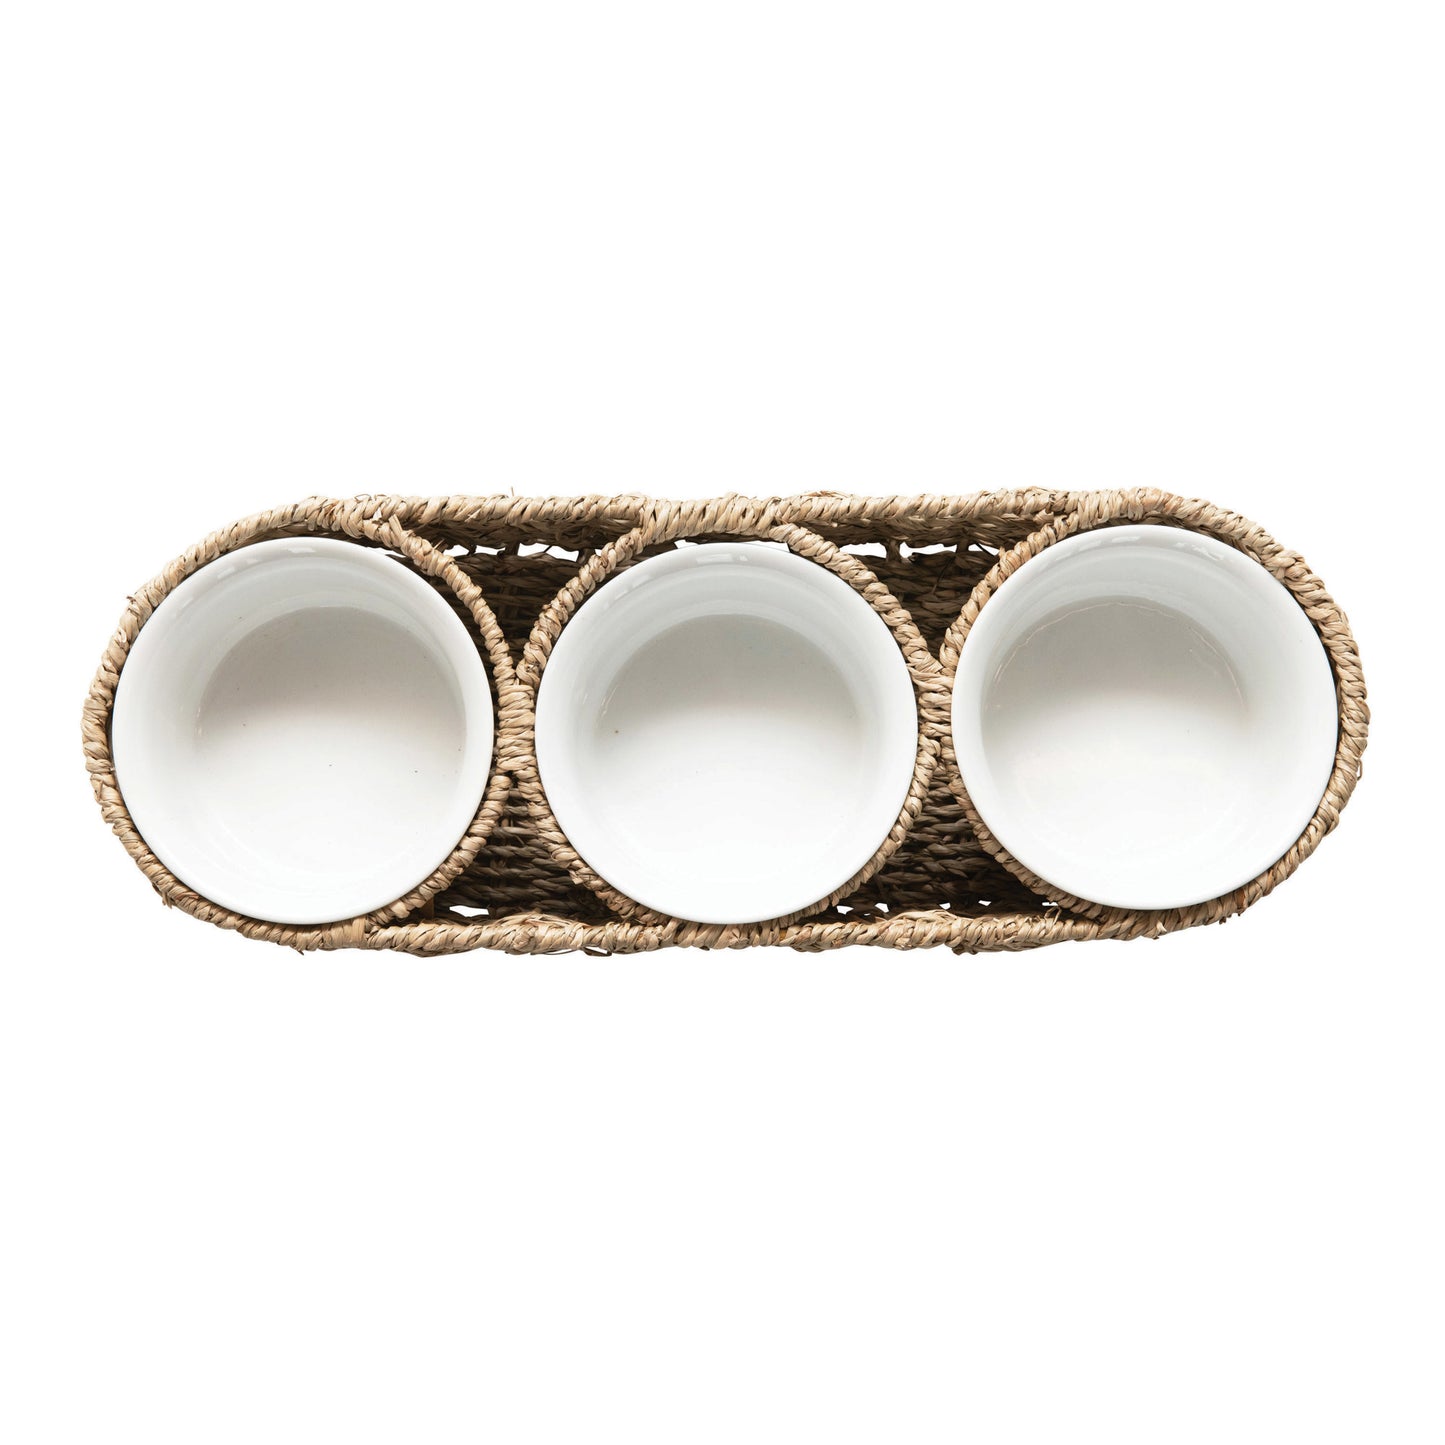 Hand-Woven Basket with Ceramic Bowls, Set of 4